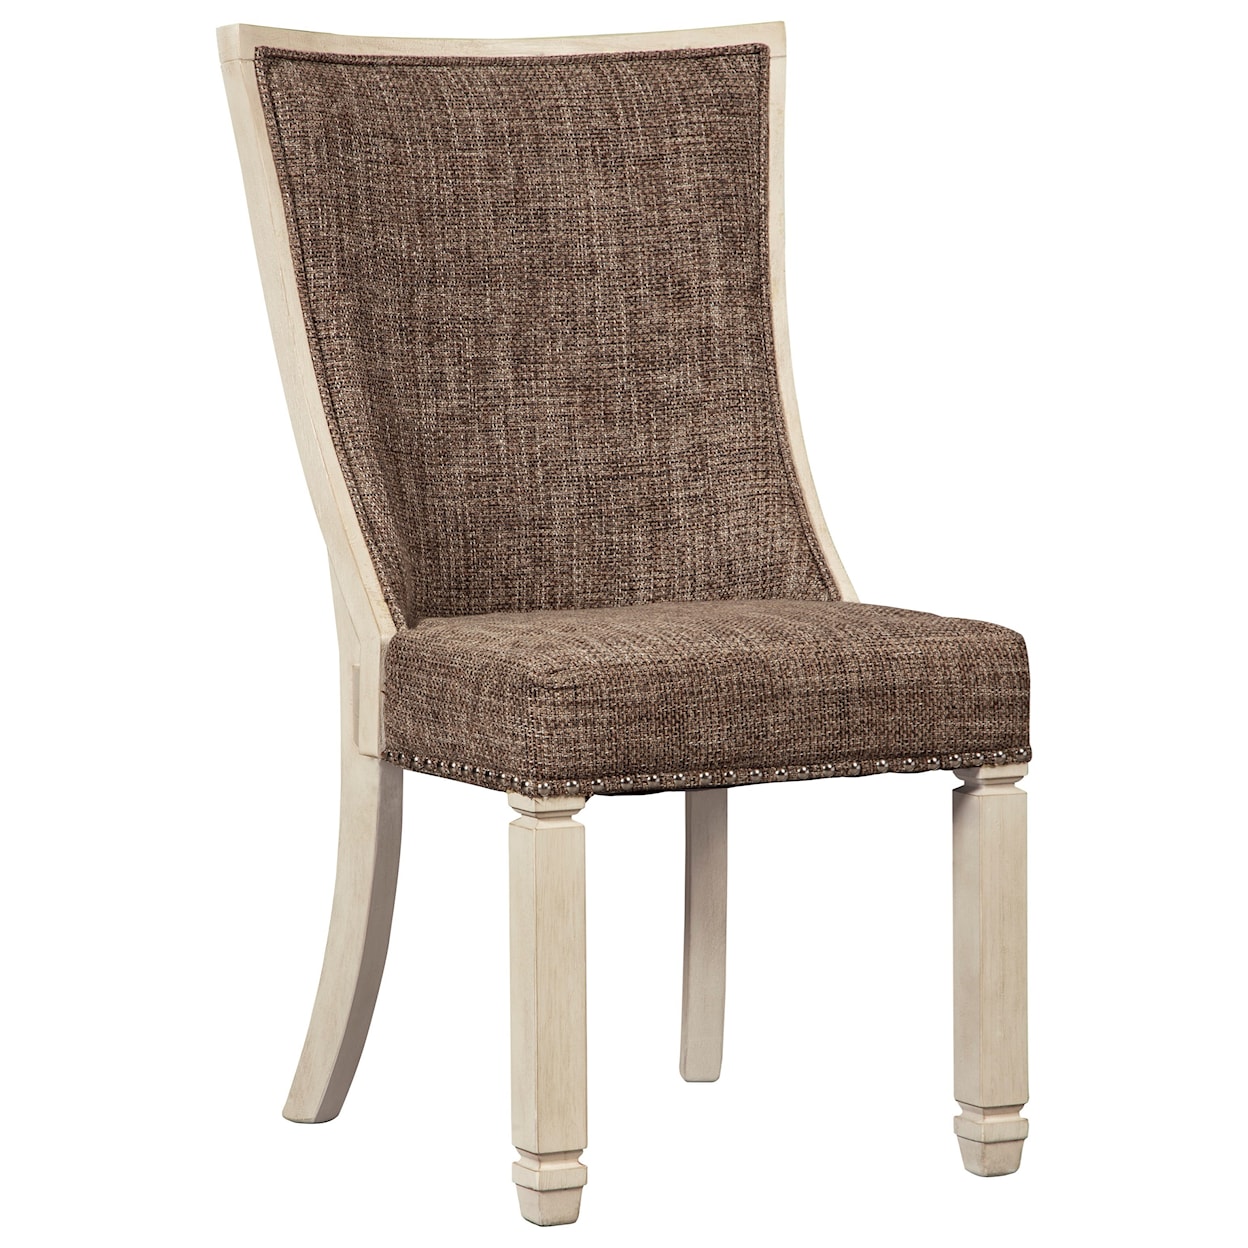 Signature Design by Ashley Thomas Upholstered Side Chair